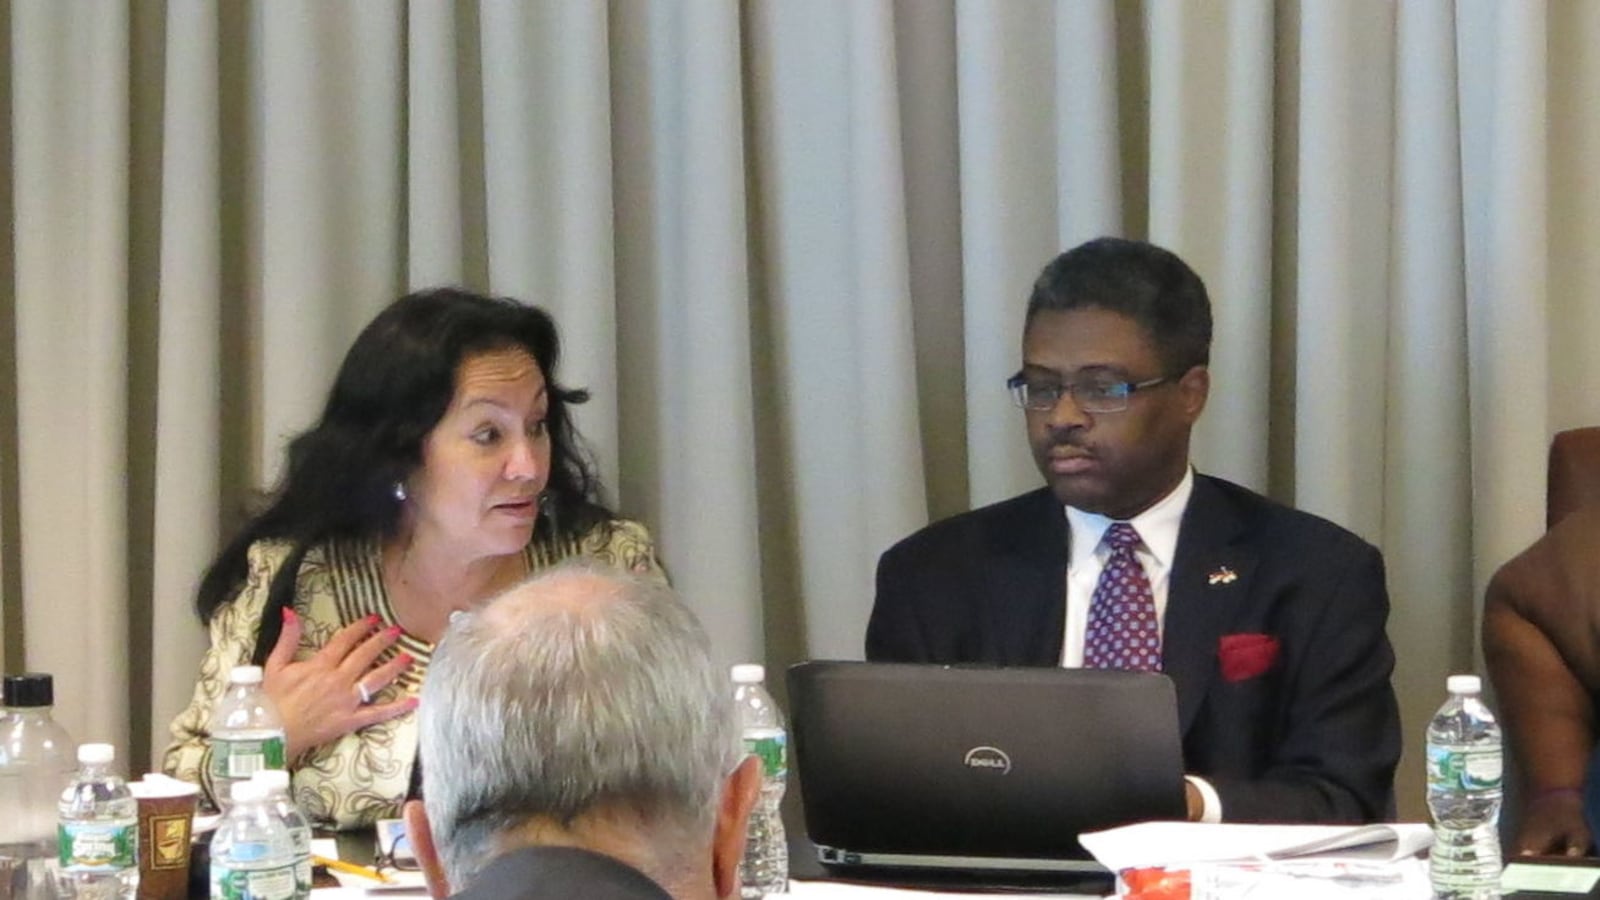 Chancellor Betty Rosa discusses teacher evaluations during a Board of Regents meeting.